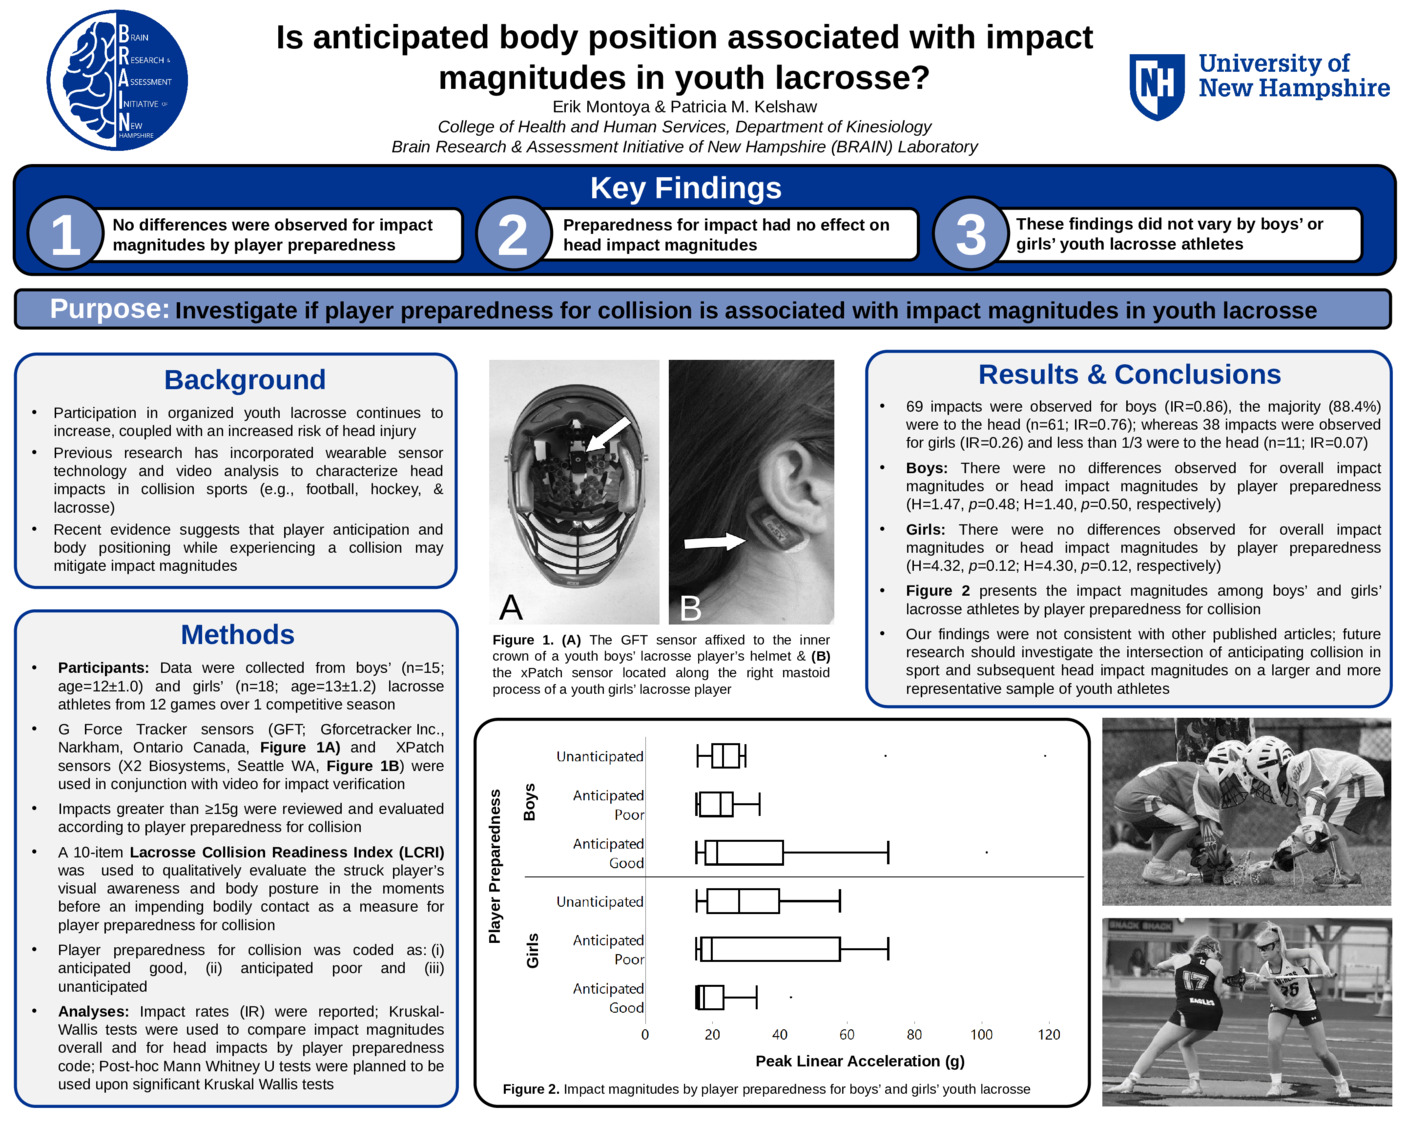 Is Anticipated Body Position Associated With Impact Magnitudes In Youth Lacrosse by em1183